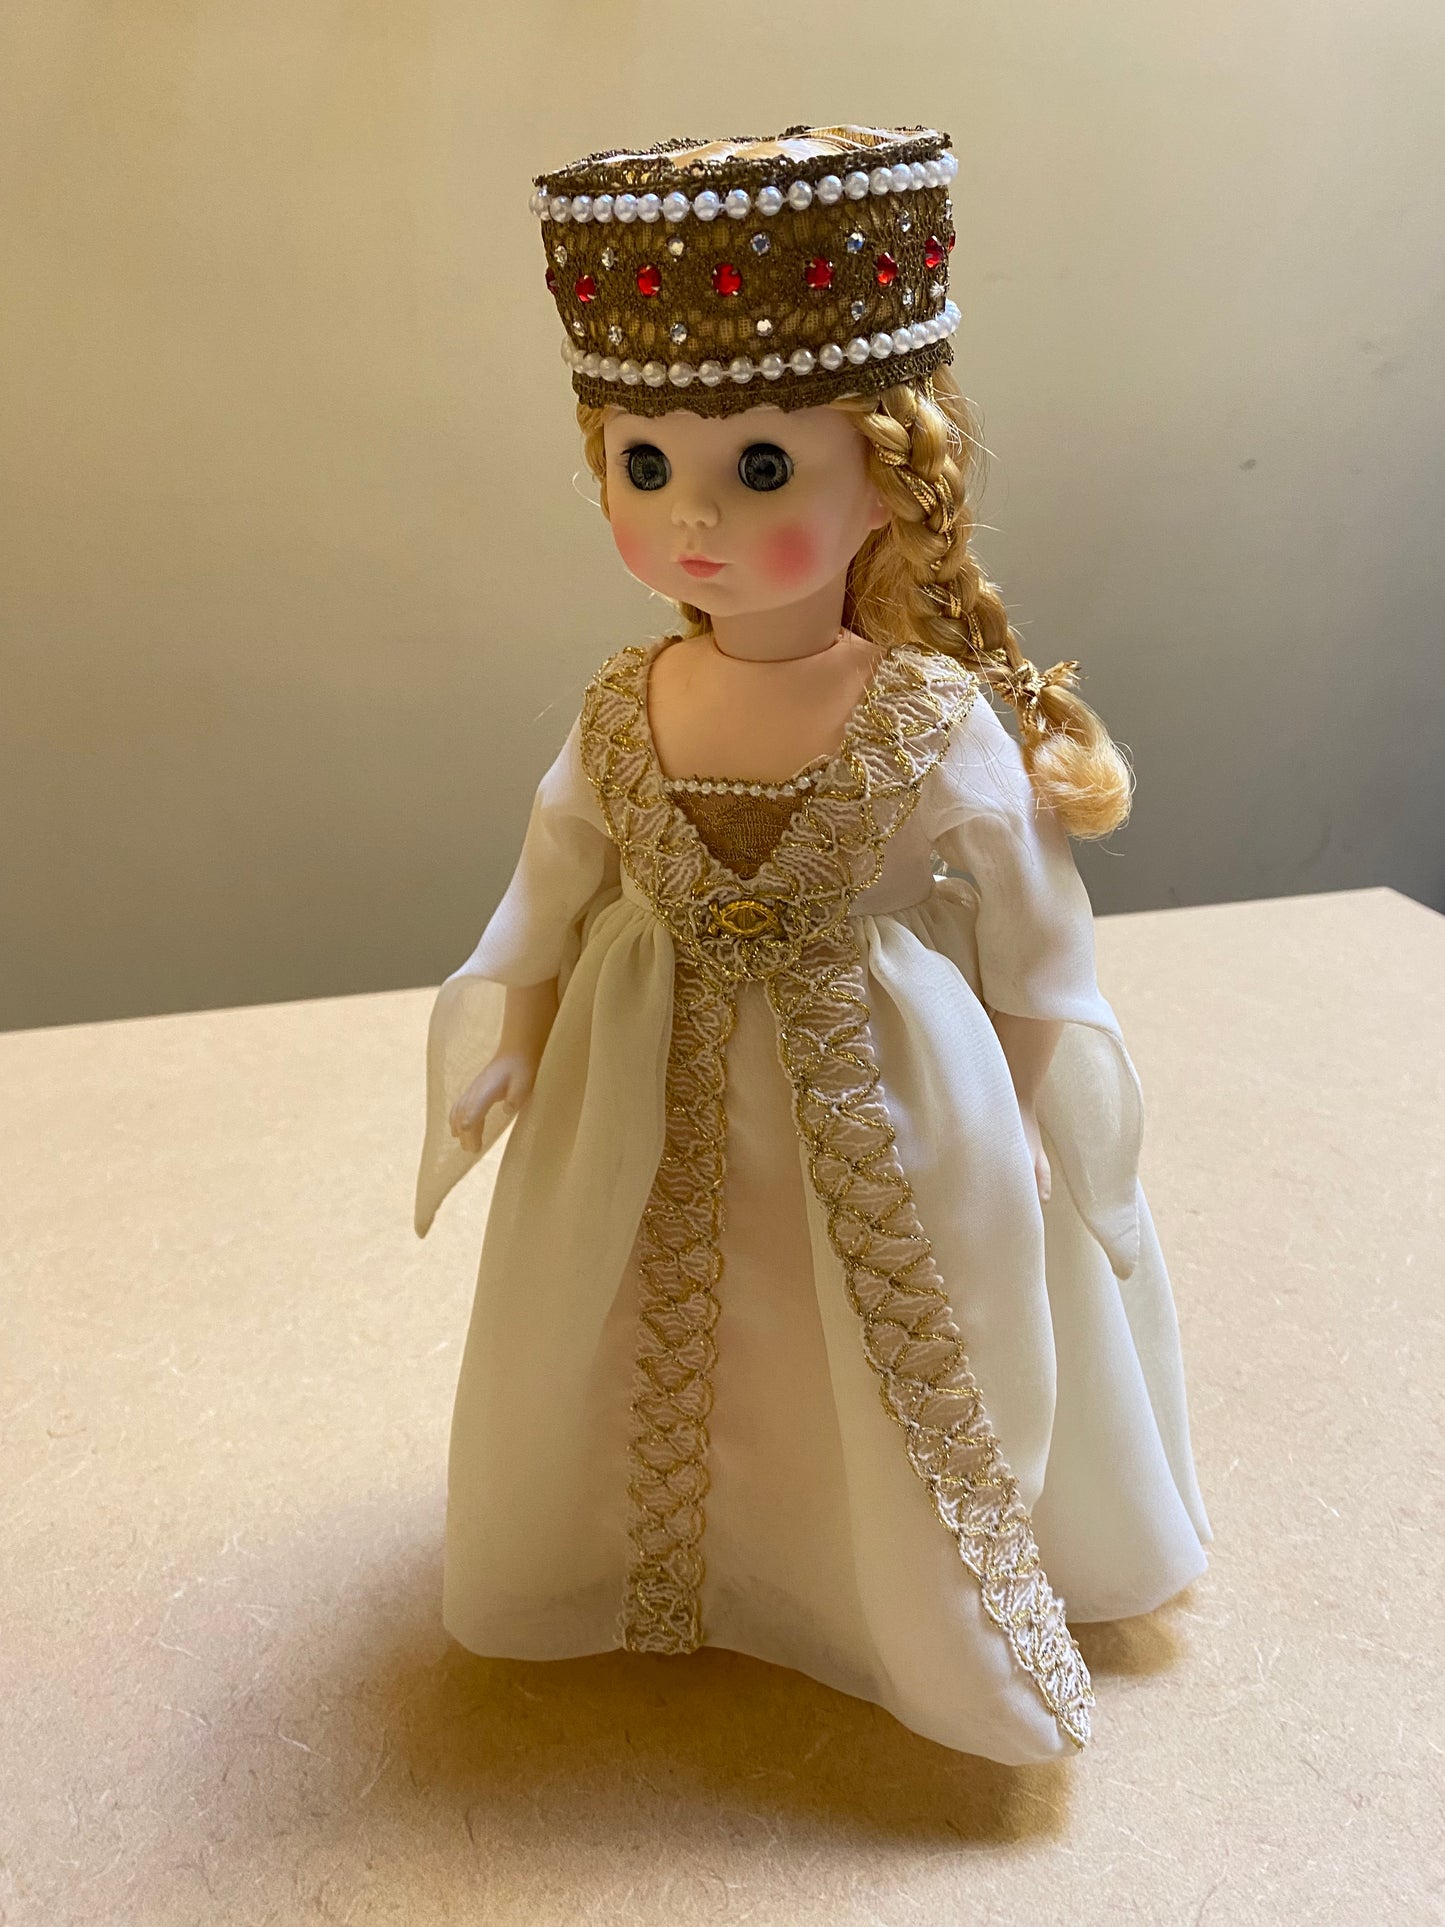 Madame Alexander's "Sweet Baby" Doll